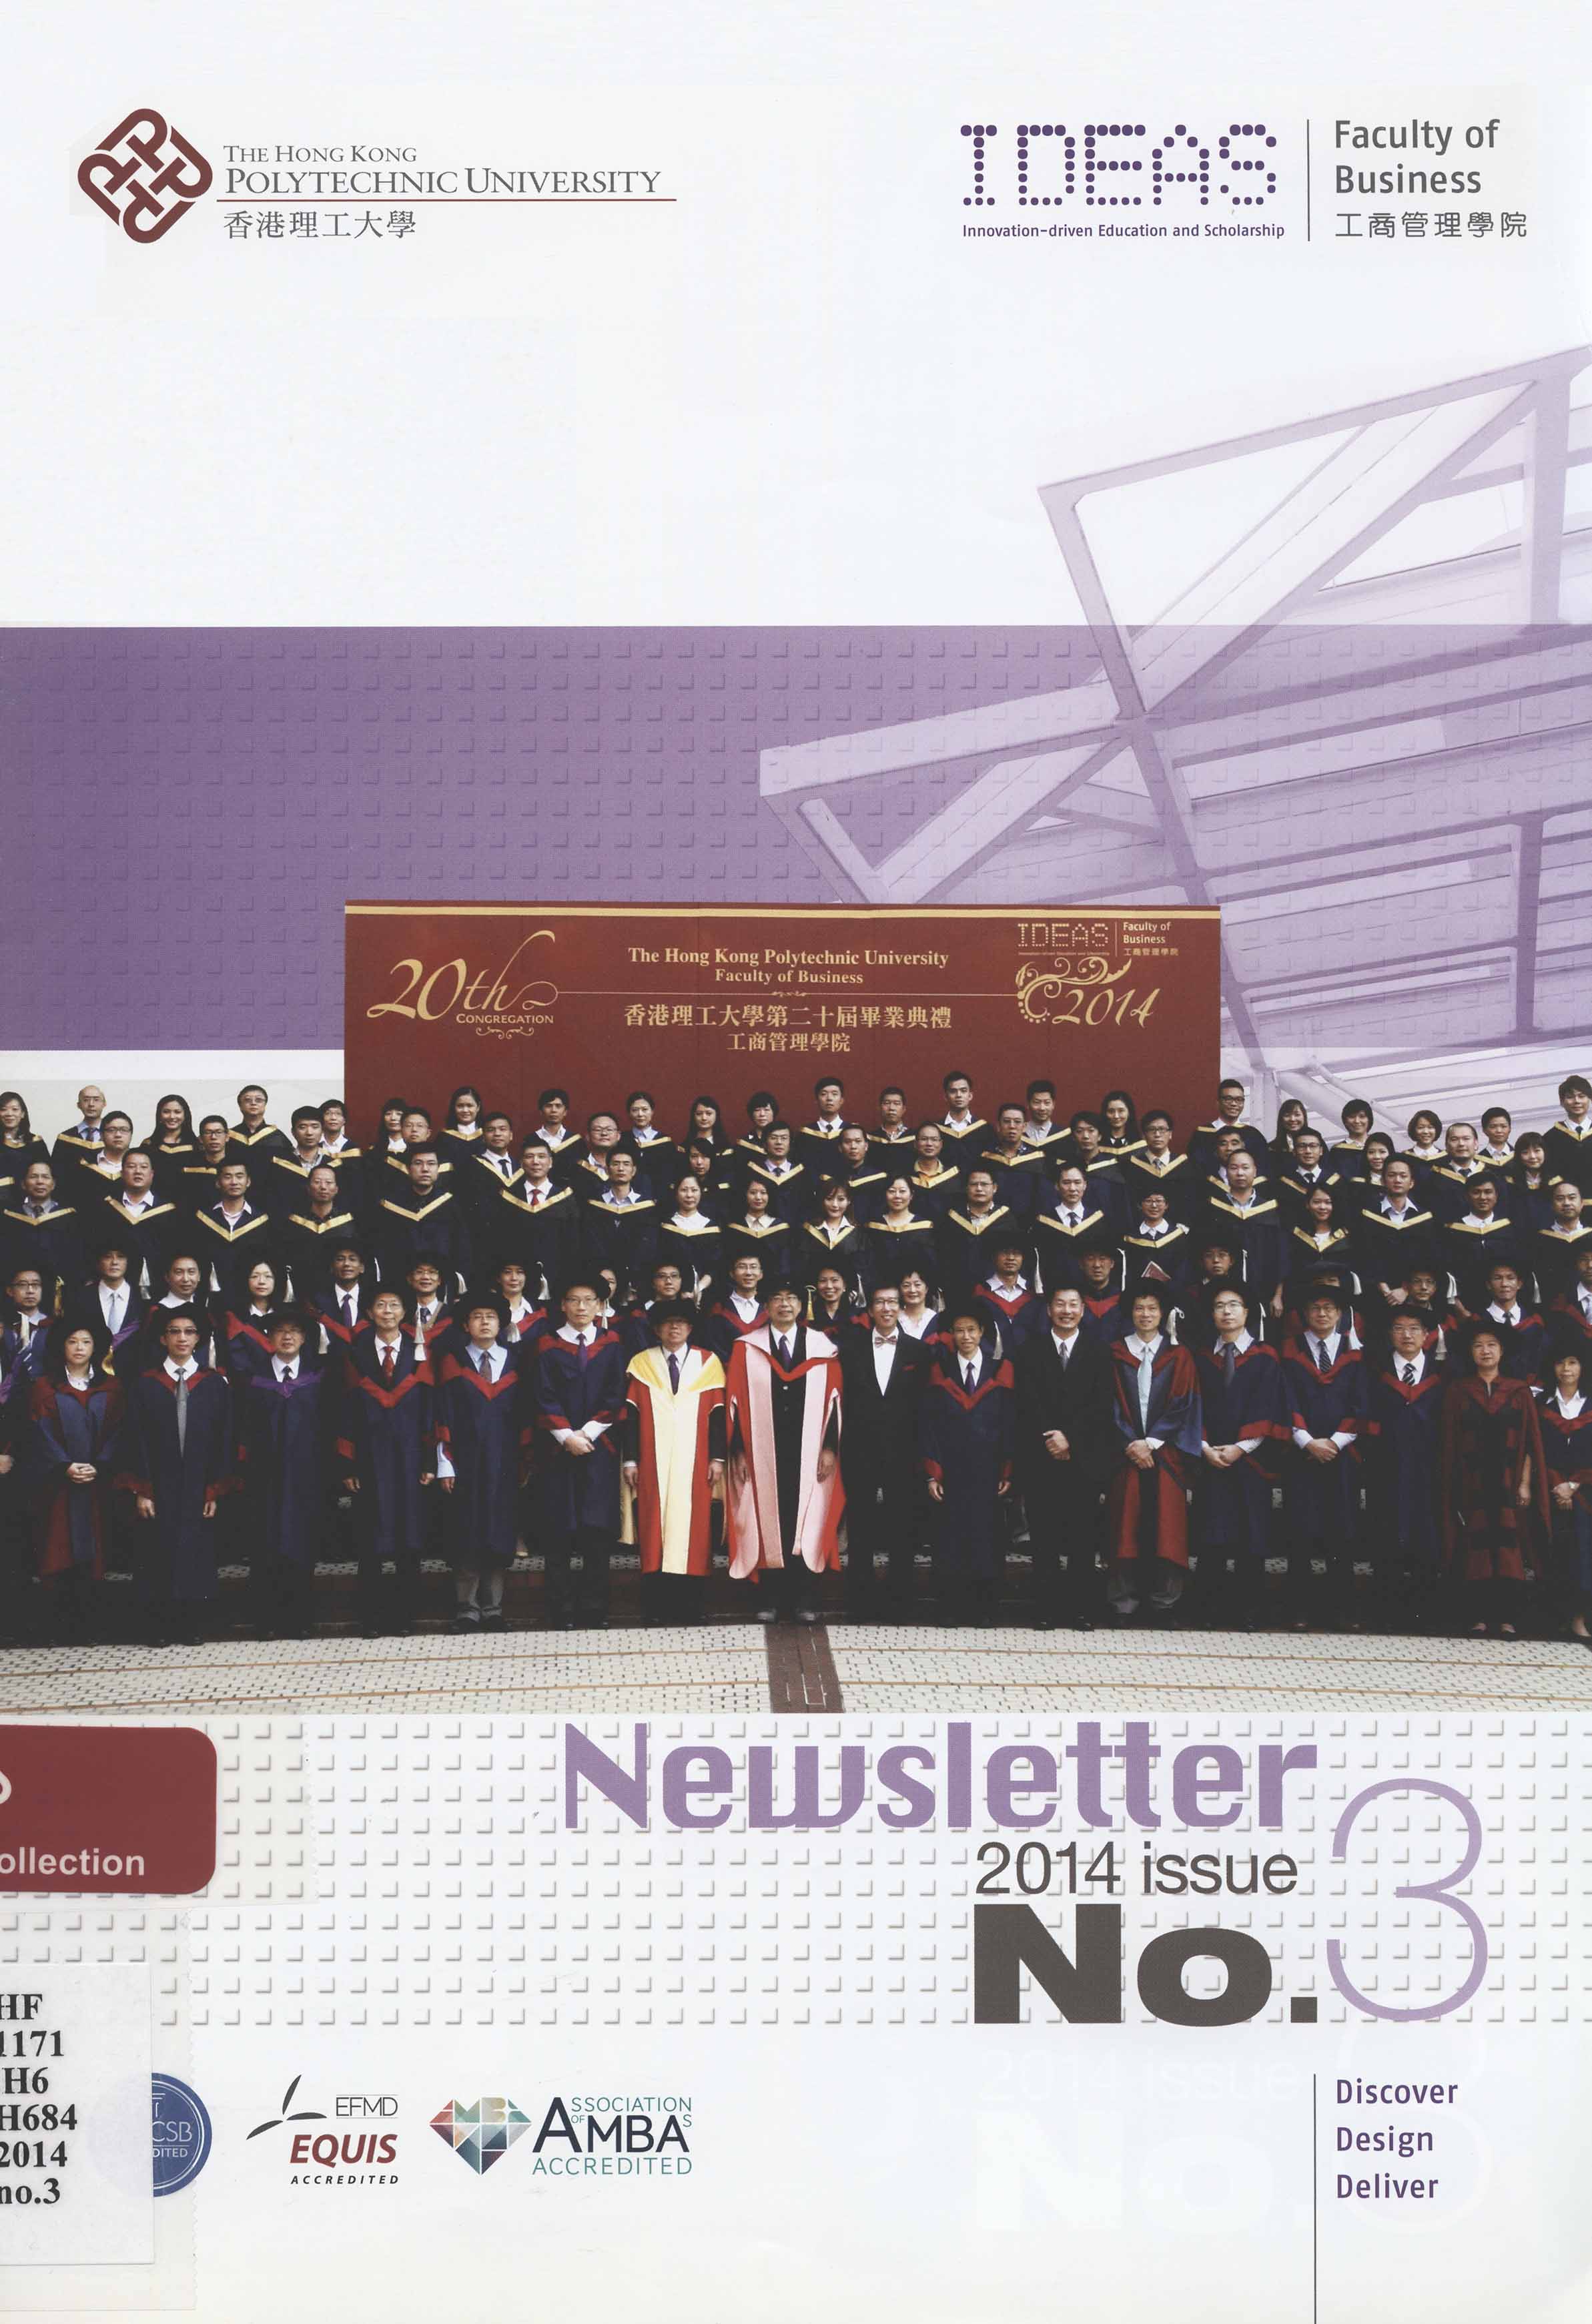 Faculty of Business newsletter. No.3, 2014